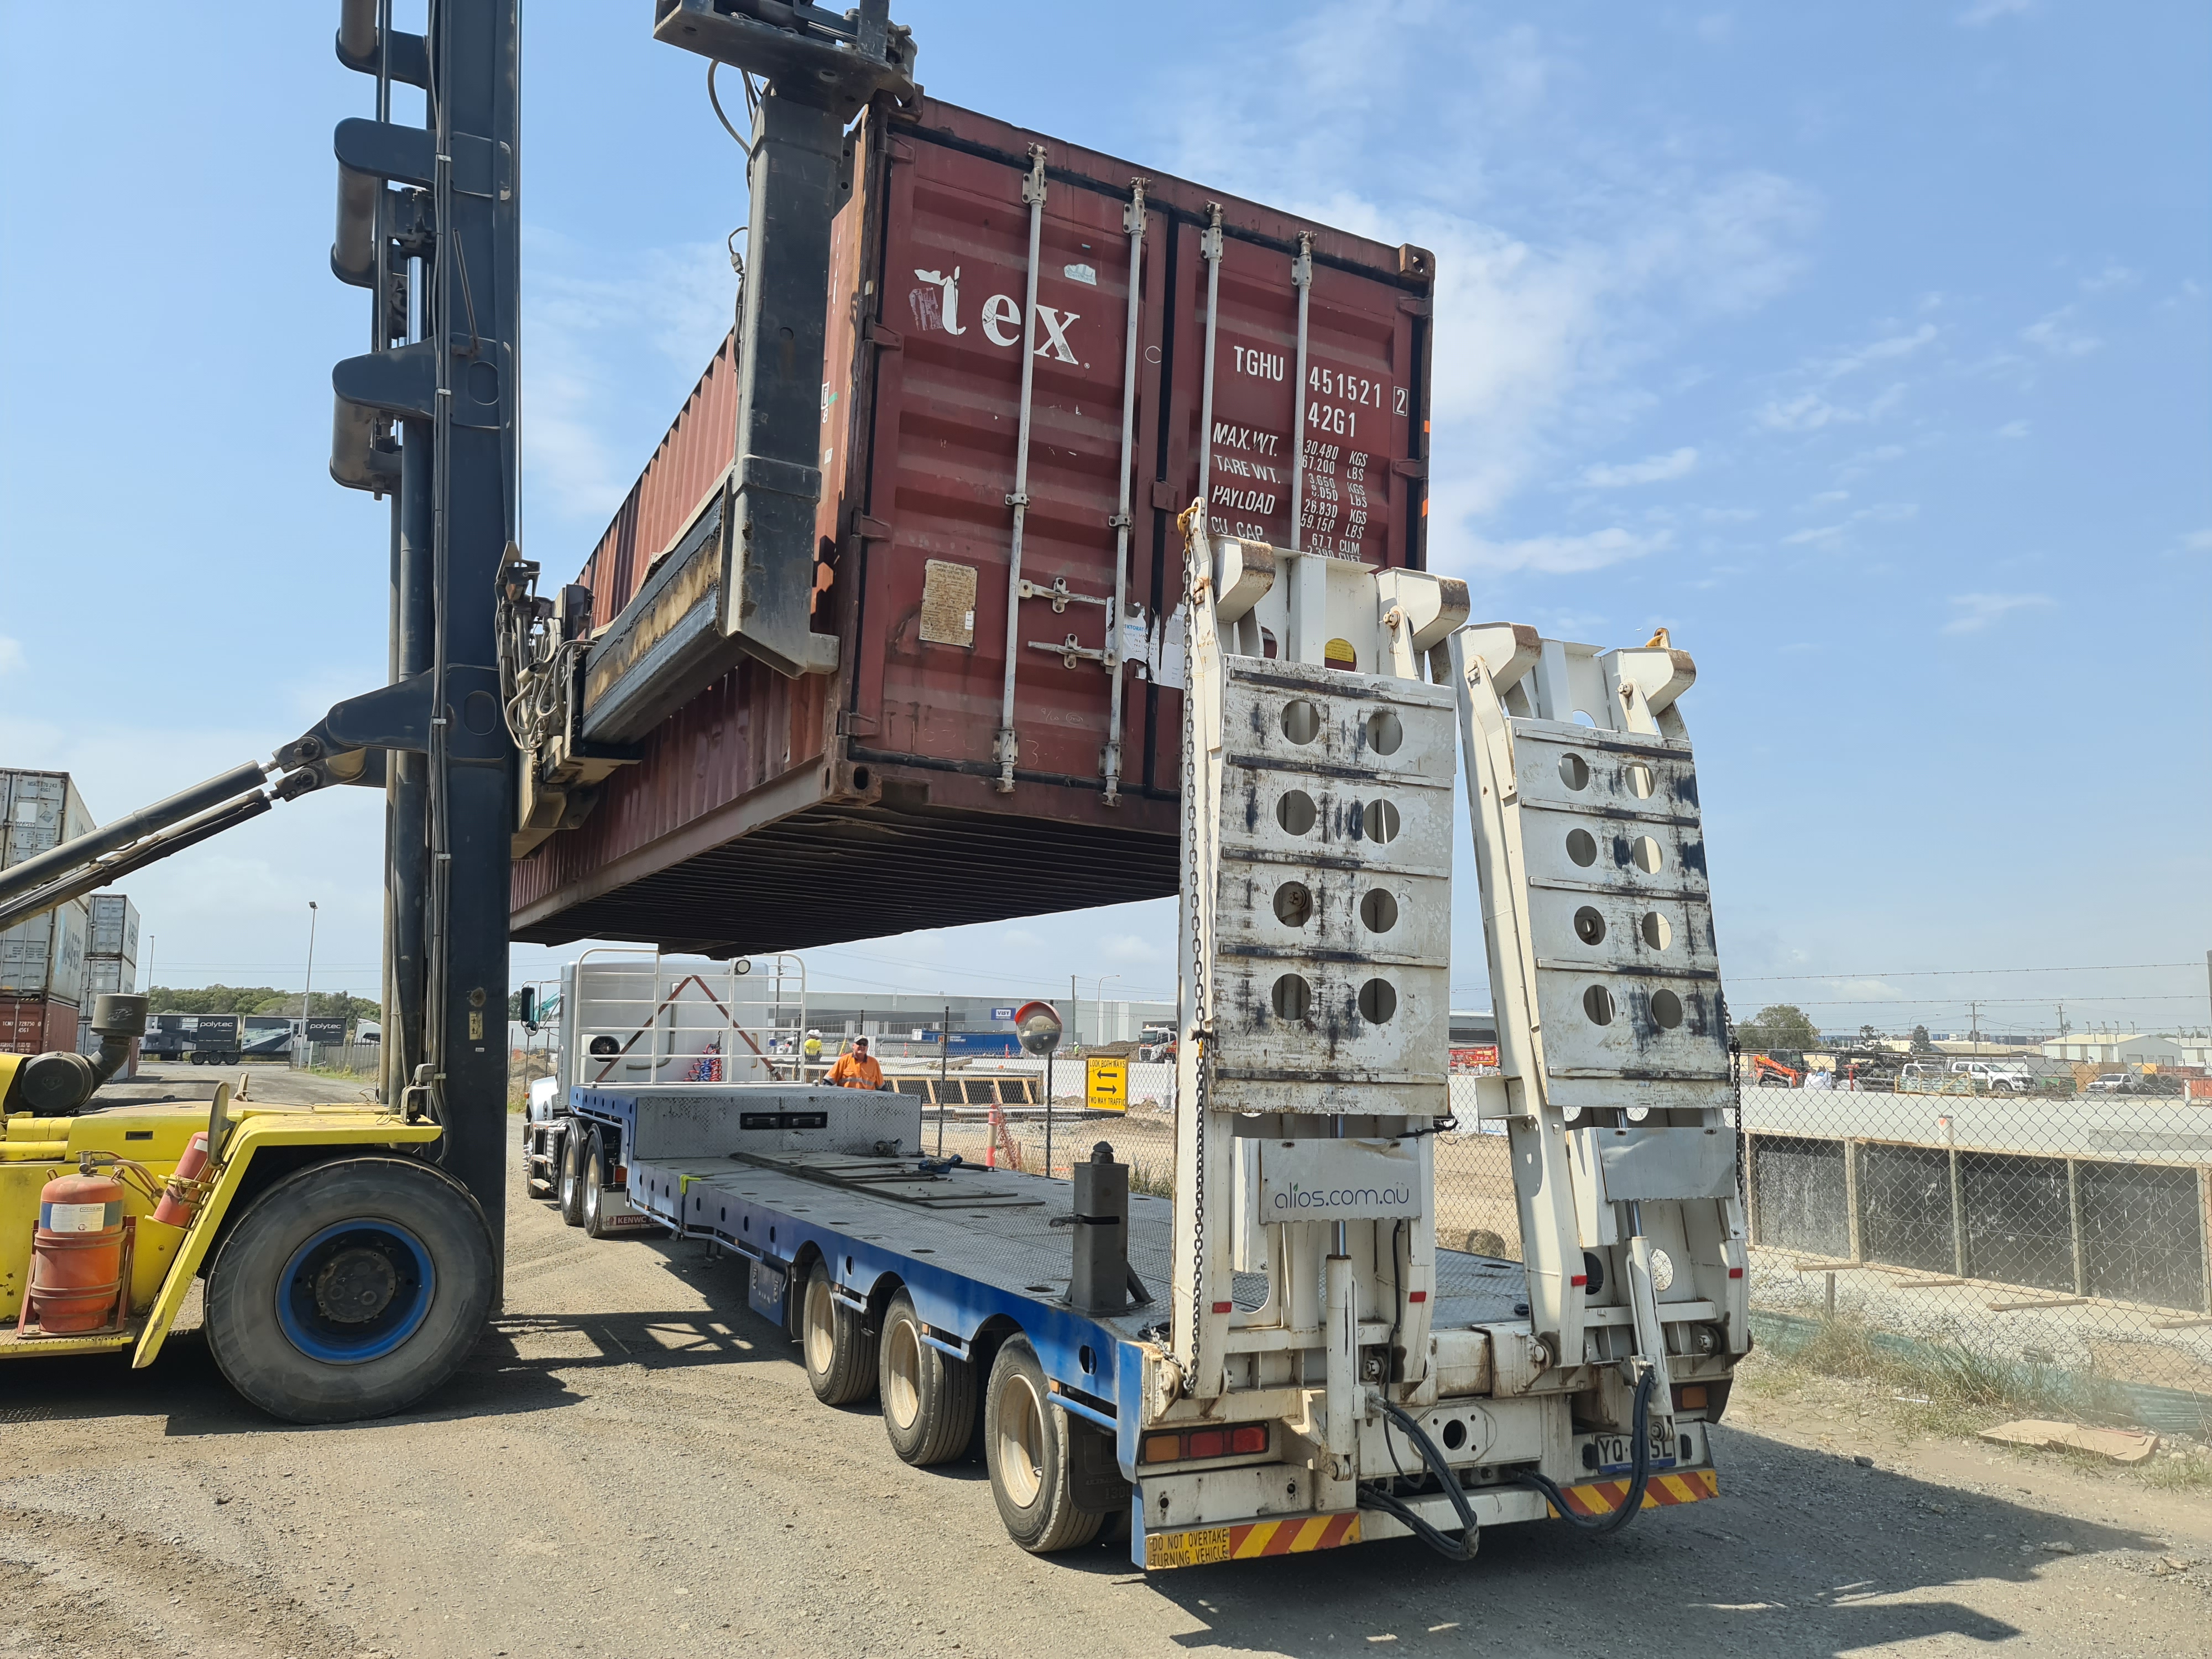 40ft shipping container being loaded onto a truck